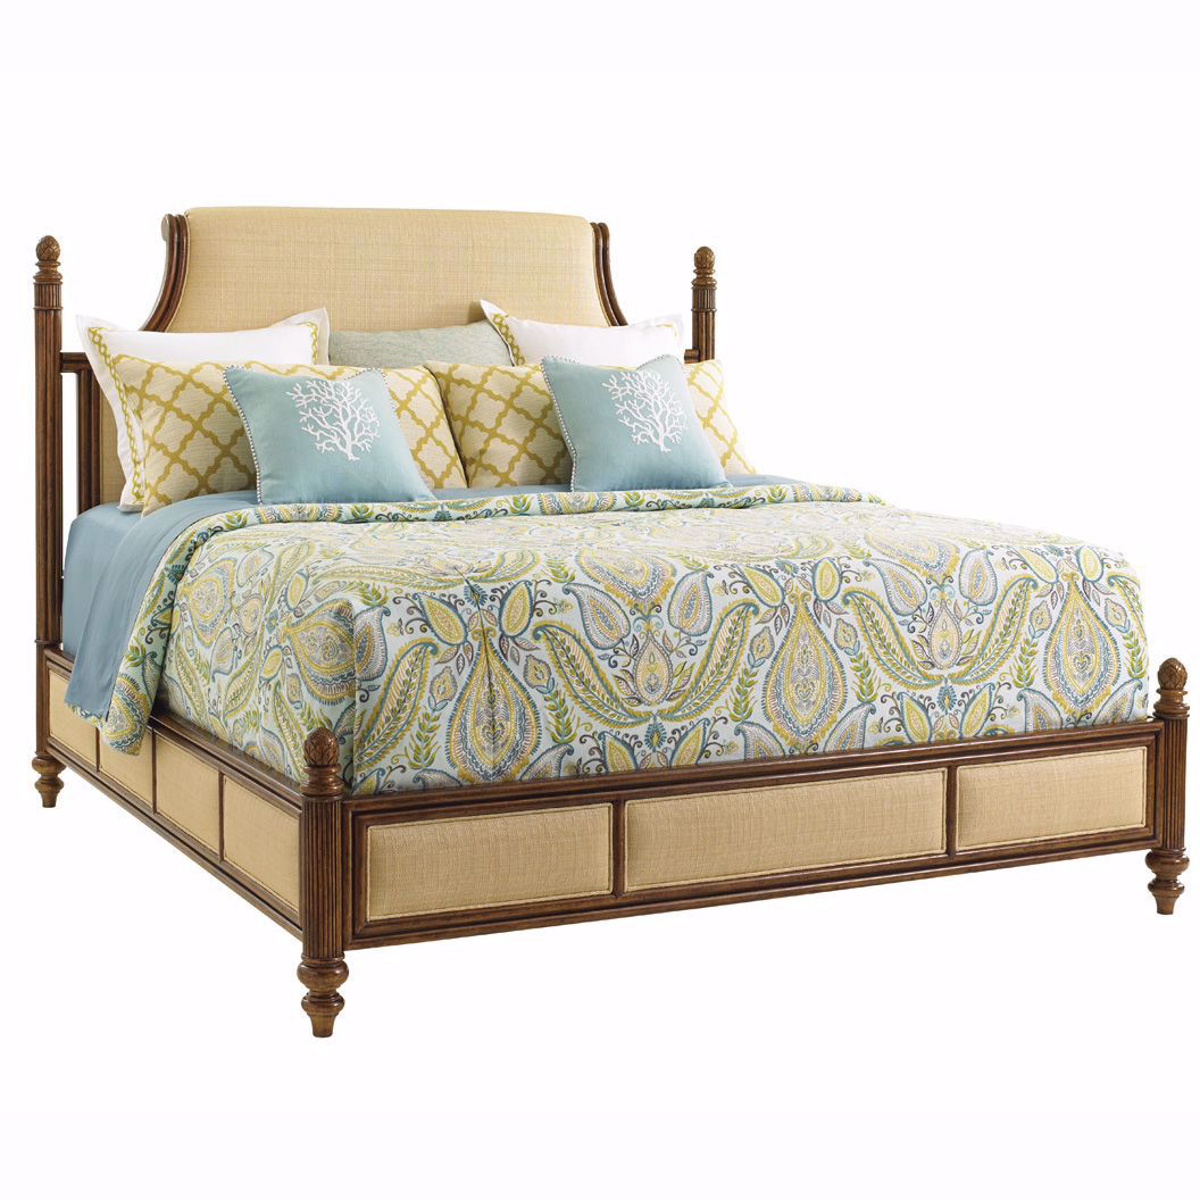 Picture of Orchid Bay Upholstered Queen Bed